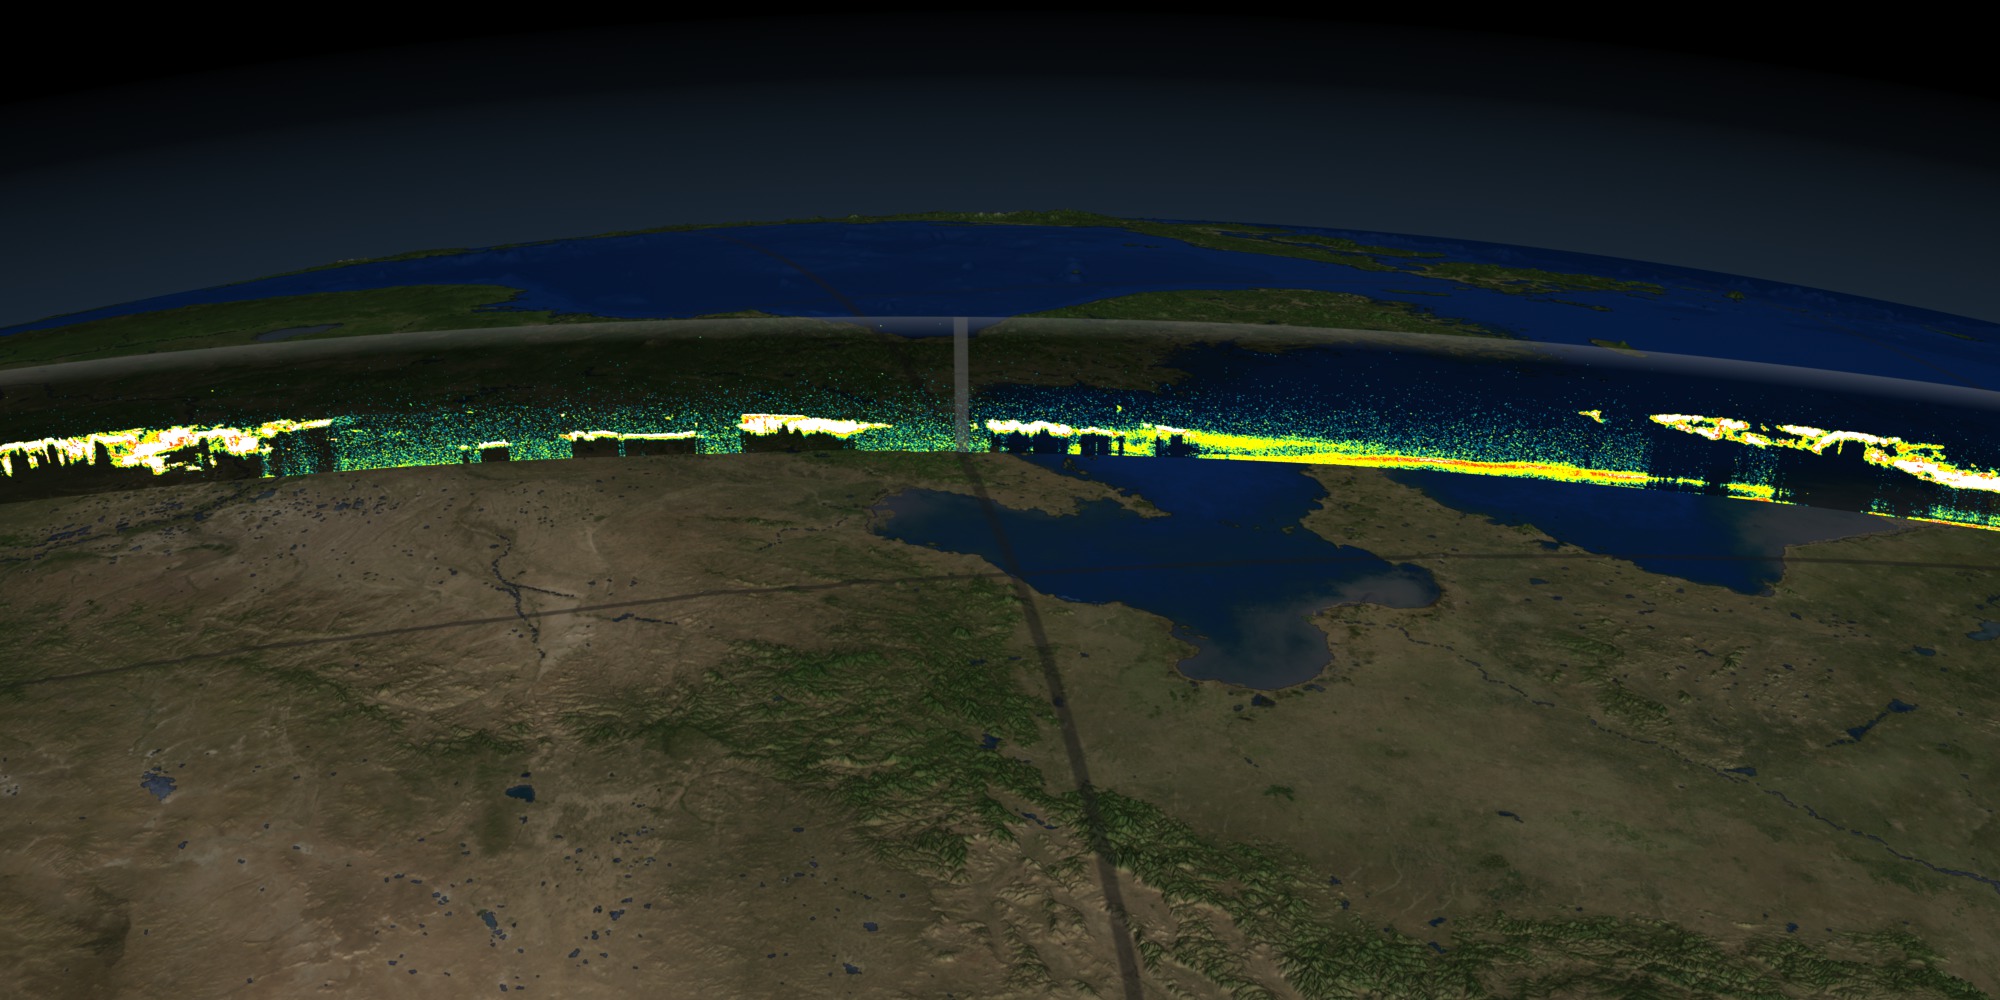 This image is a wide-angle view of the profile of CALIPSO total attenuated backscatter  from 2006-06-15.  The view is looking eastward across China to the Yellow Sea and the Korean Peninsula.  